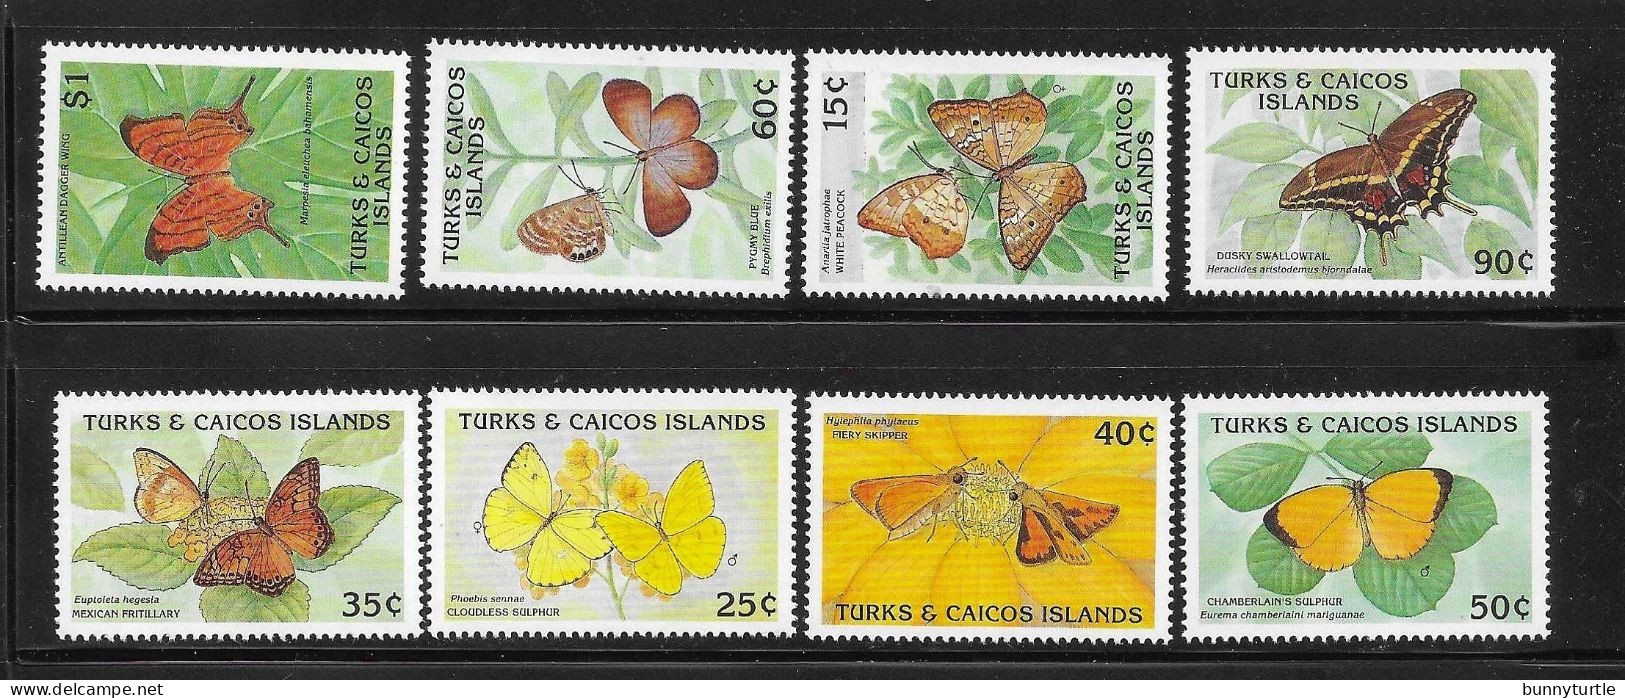 Turks And Caicos Islands 1990 Butterflies Butterfly MNH - Turcas Y Caicos